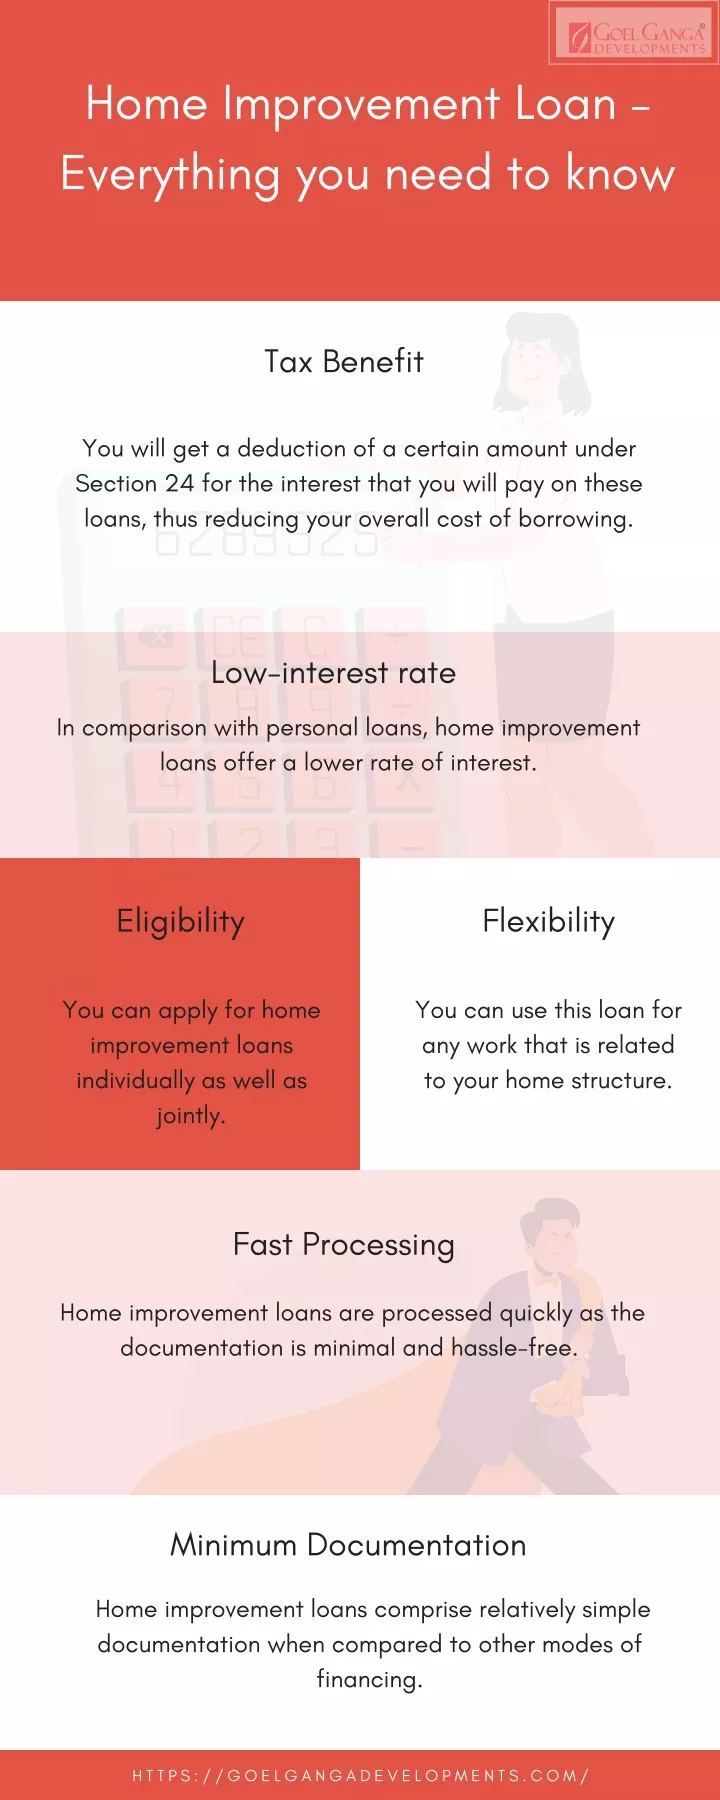 home improvement loan everything you need to know